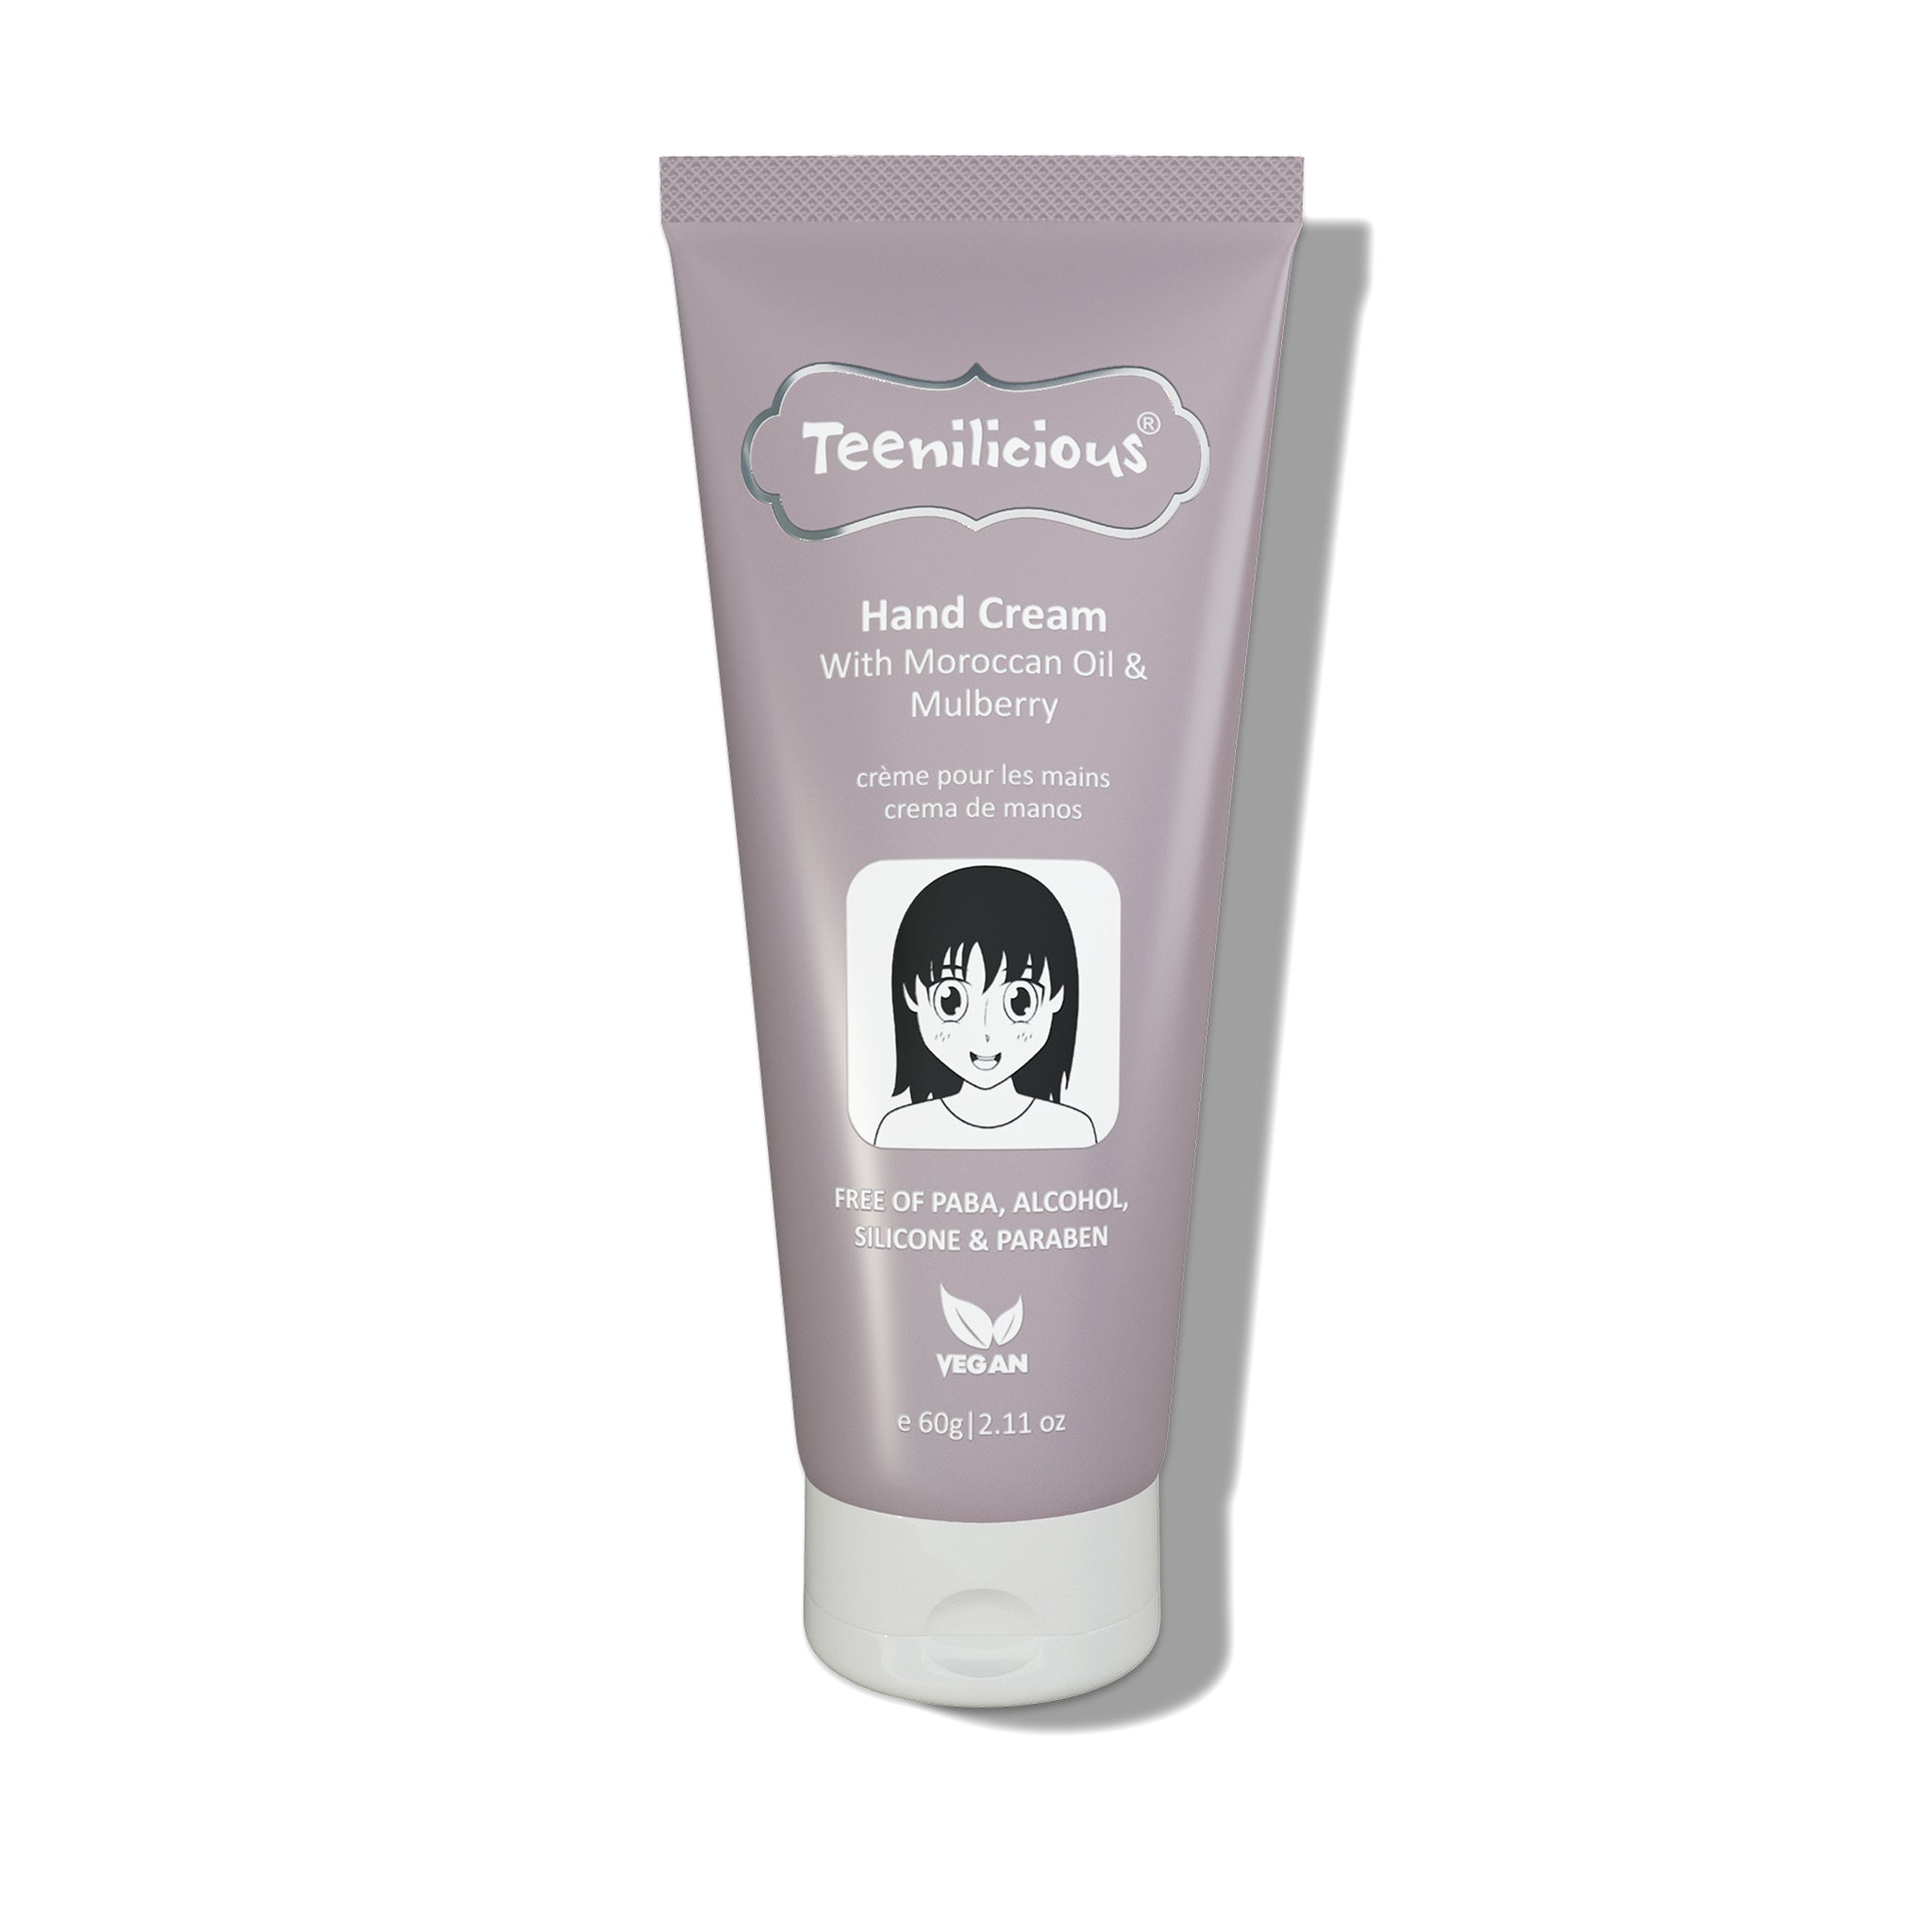 Product View Of Hand Cream With Moroccan Oil & Mulberry